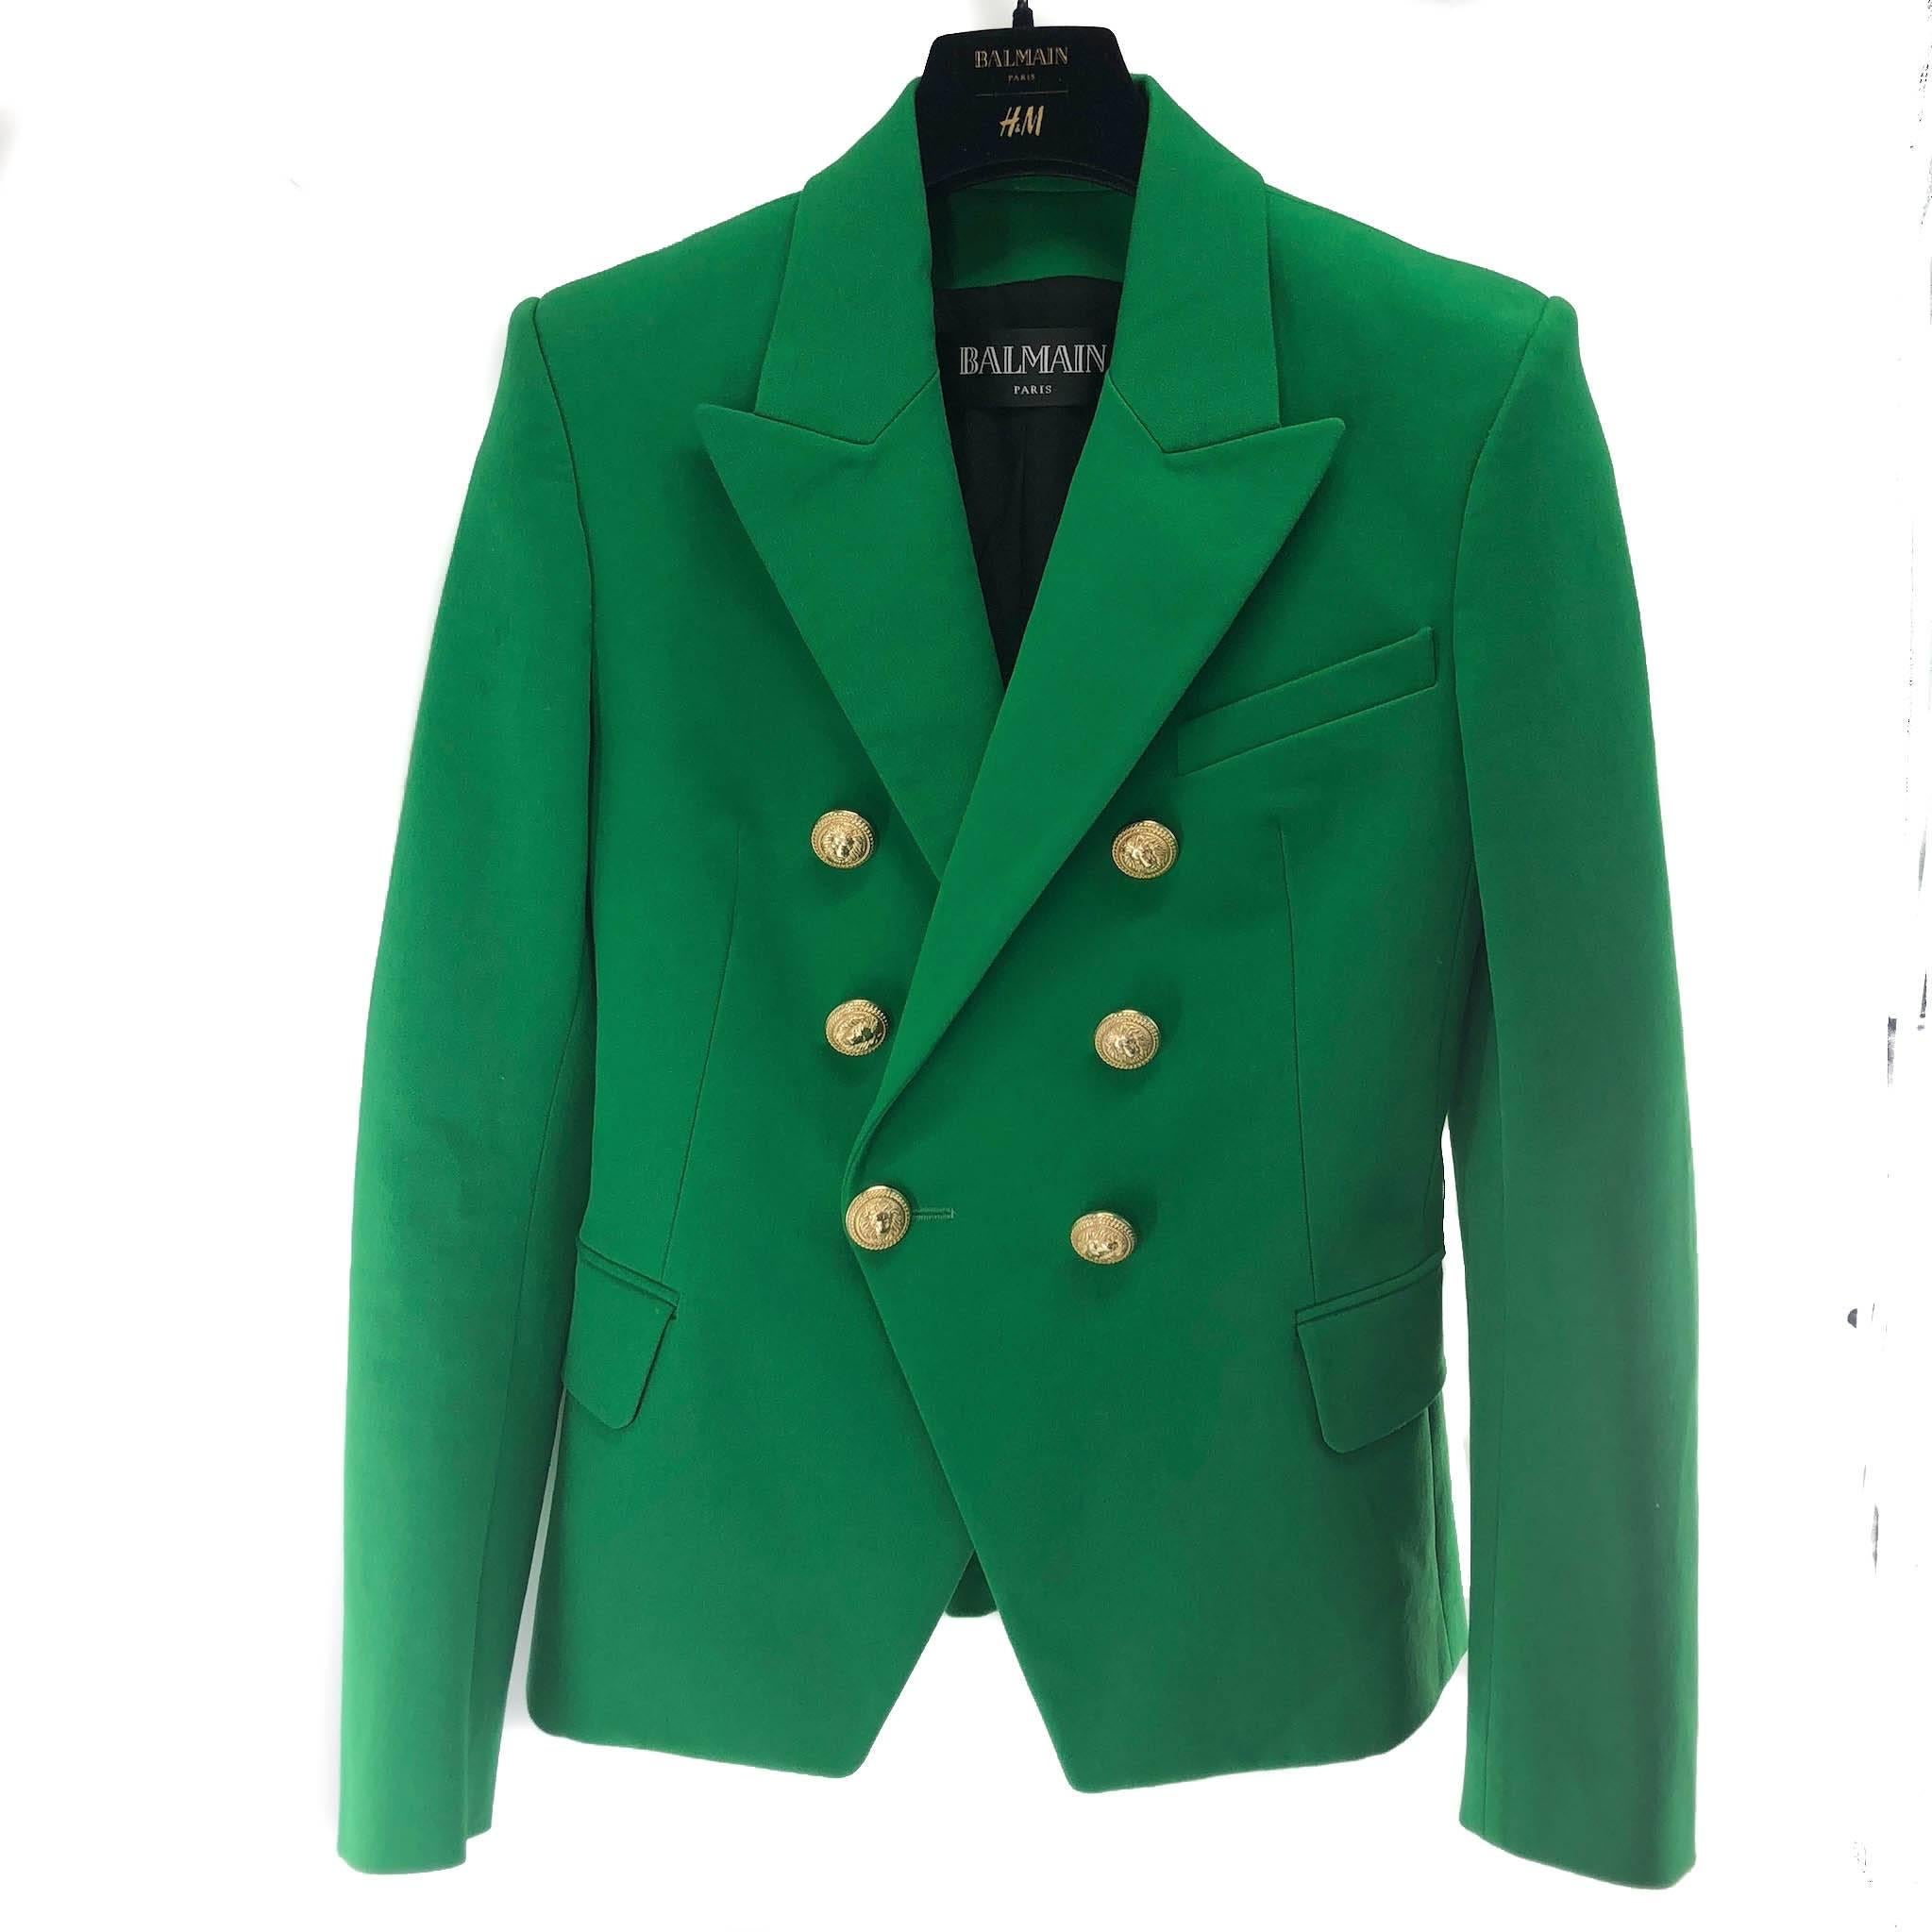 Balmain Emerald Green Blazer with Gold Buttons For Sale